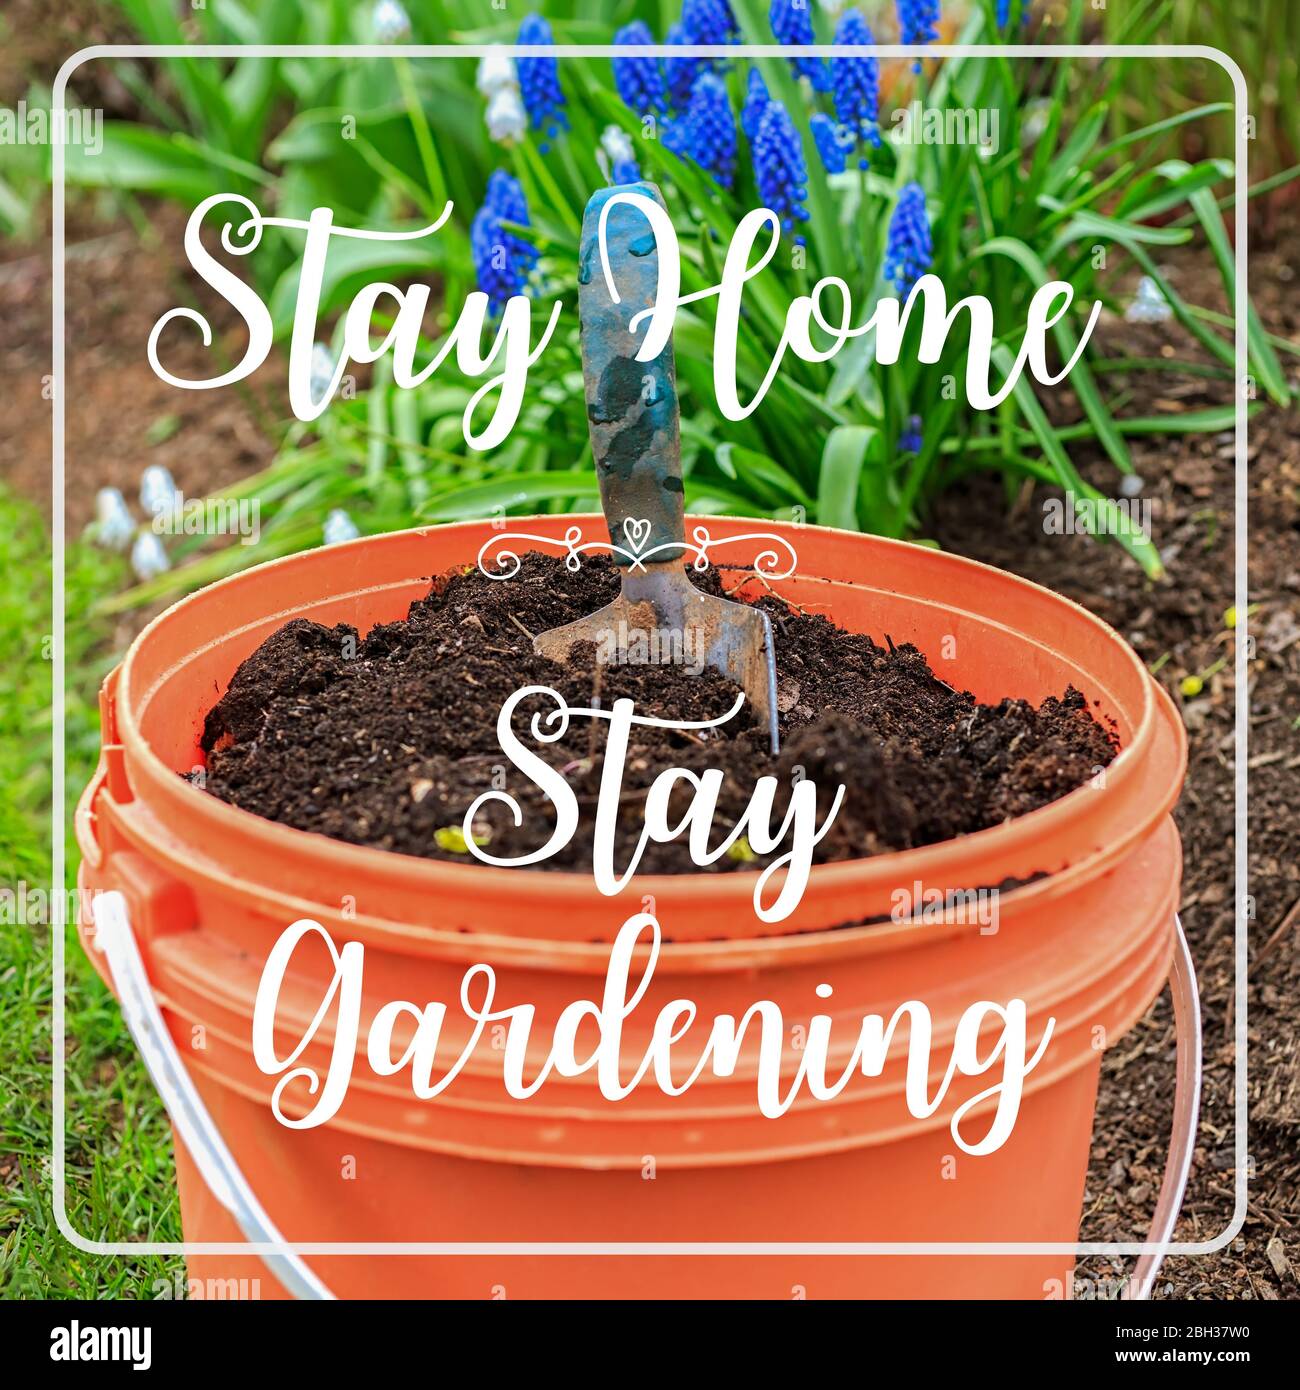 Stay Home, Stay Gardening quote. Gardening activity while staying home in isolation. Stock Photo